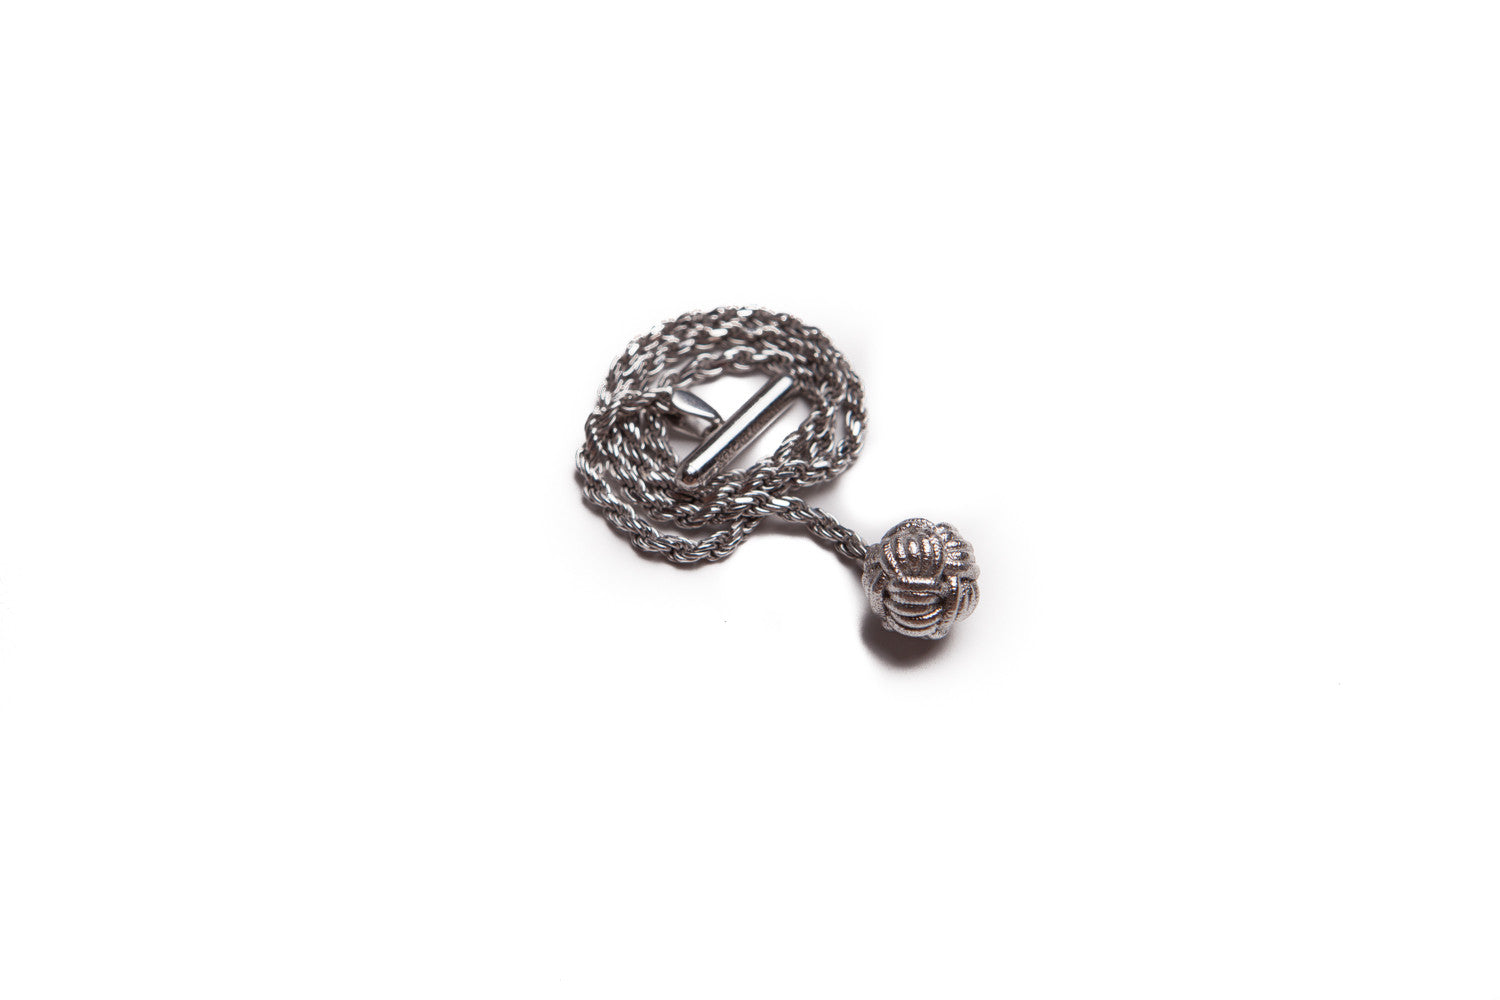 Infinity Knot Silver Lapel Chain